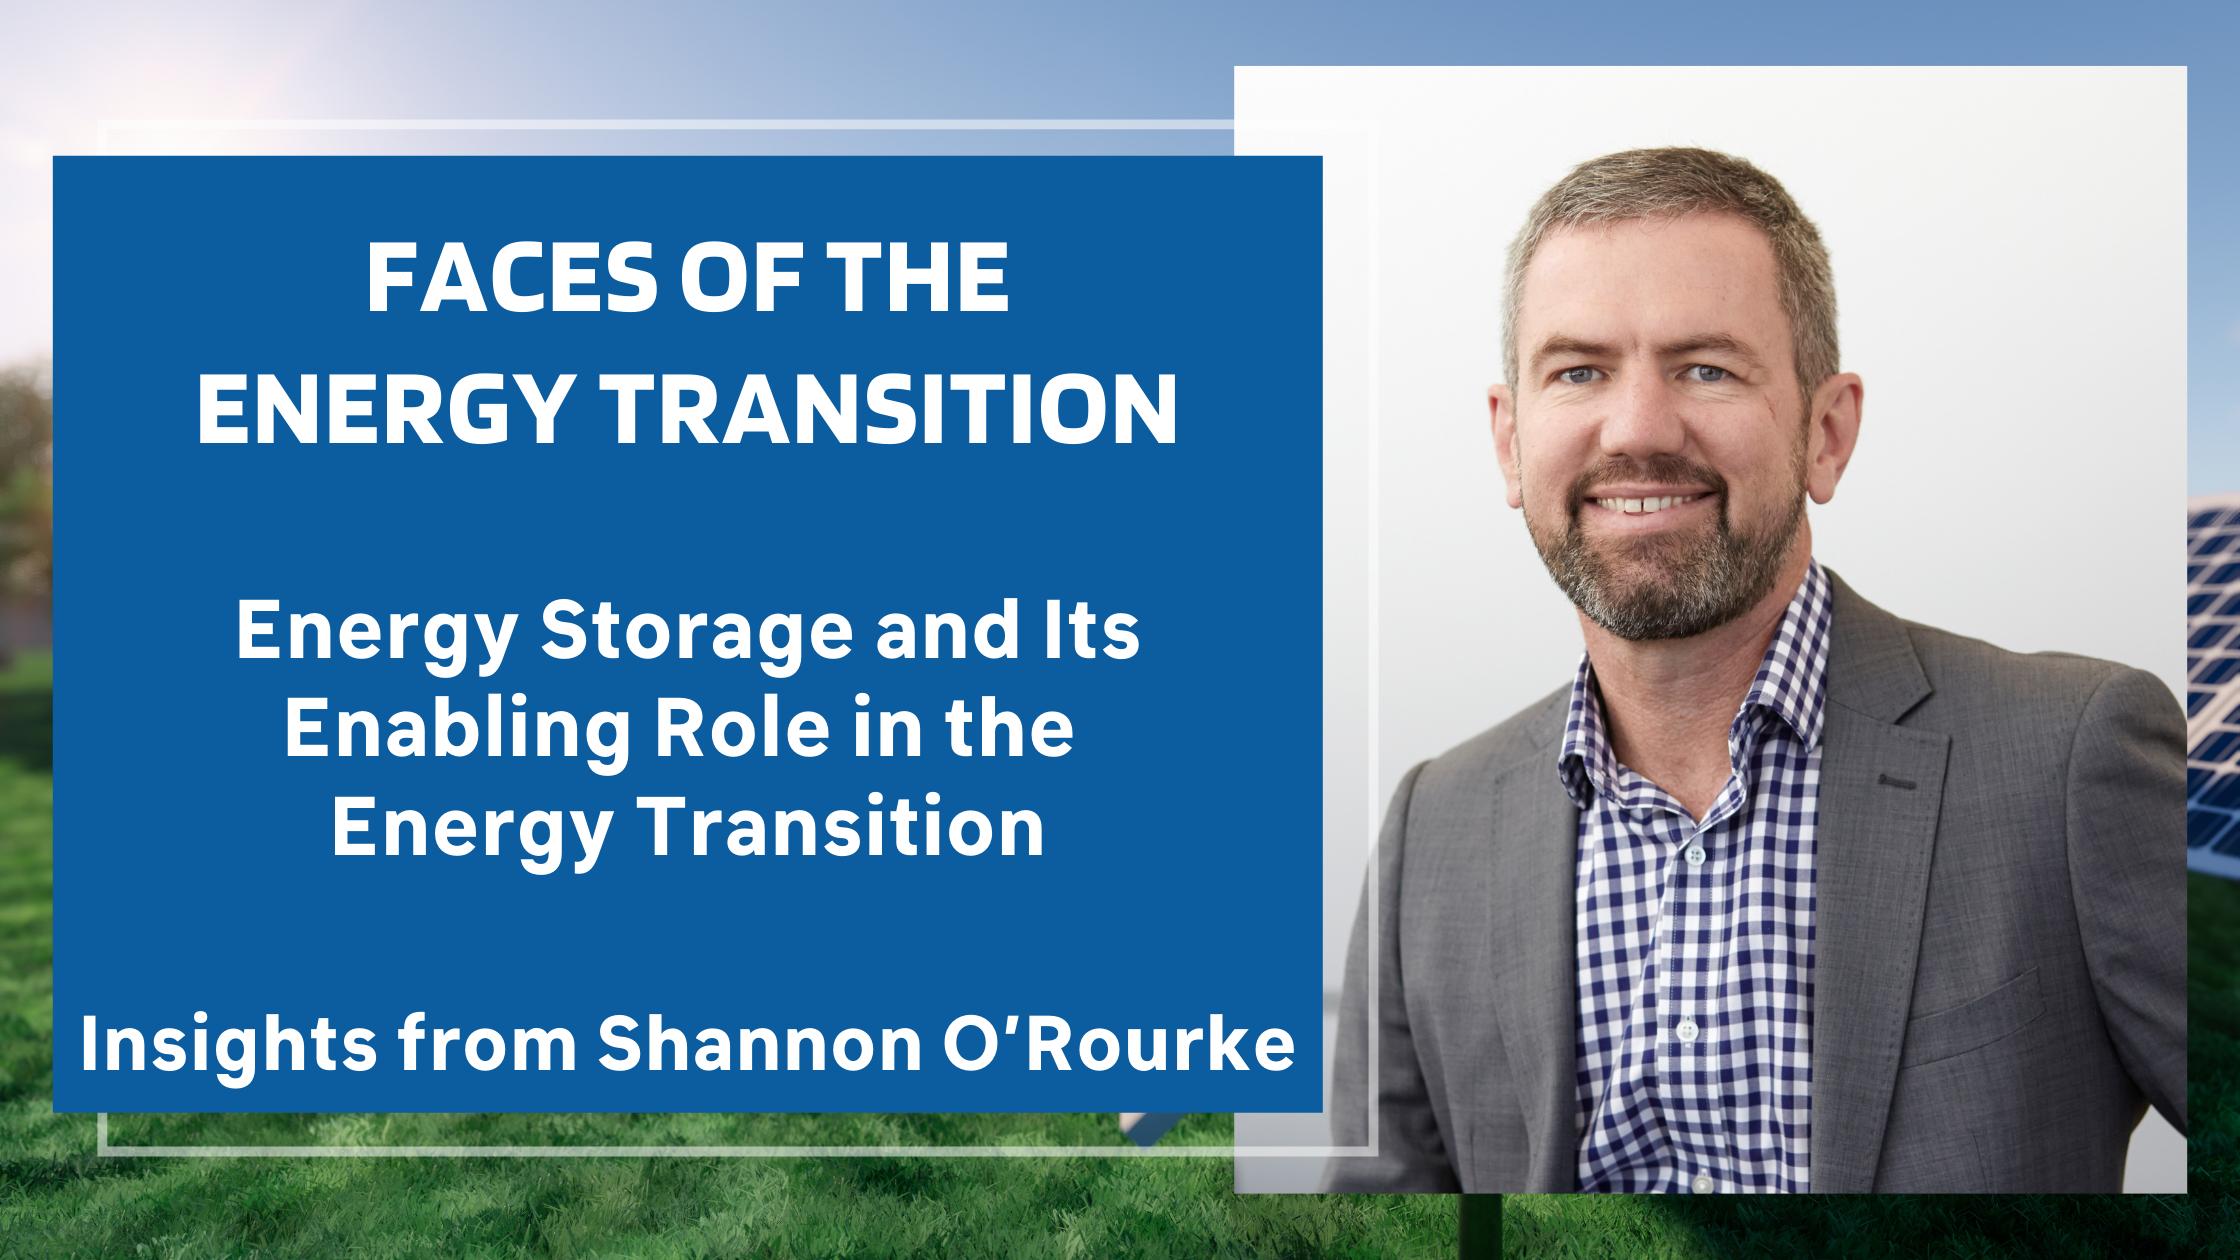 Energy Storage and its Enabling Role in the Energy Transition by Shannon O'Rourke